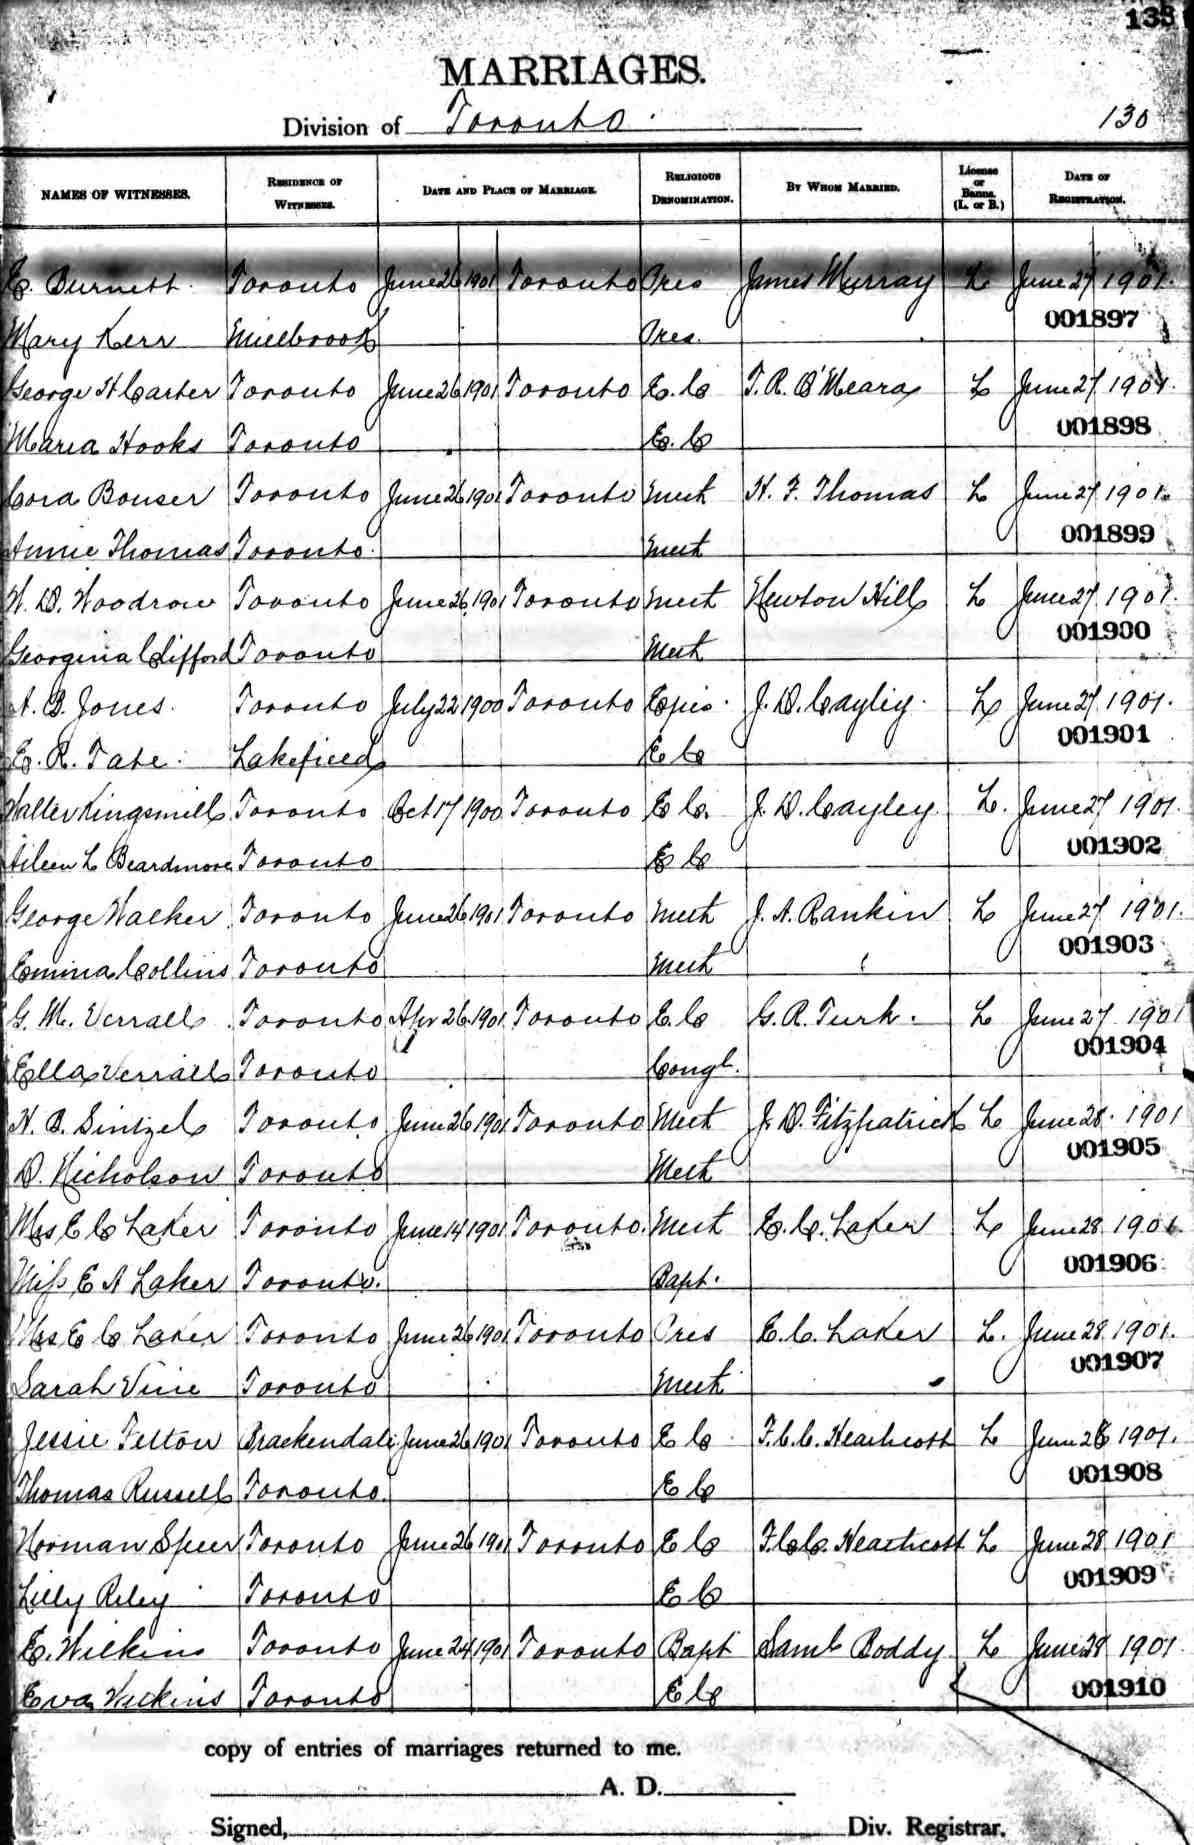 marriage record - wilby hubbard + violet strickland 1900b.jpg